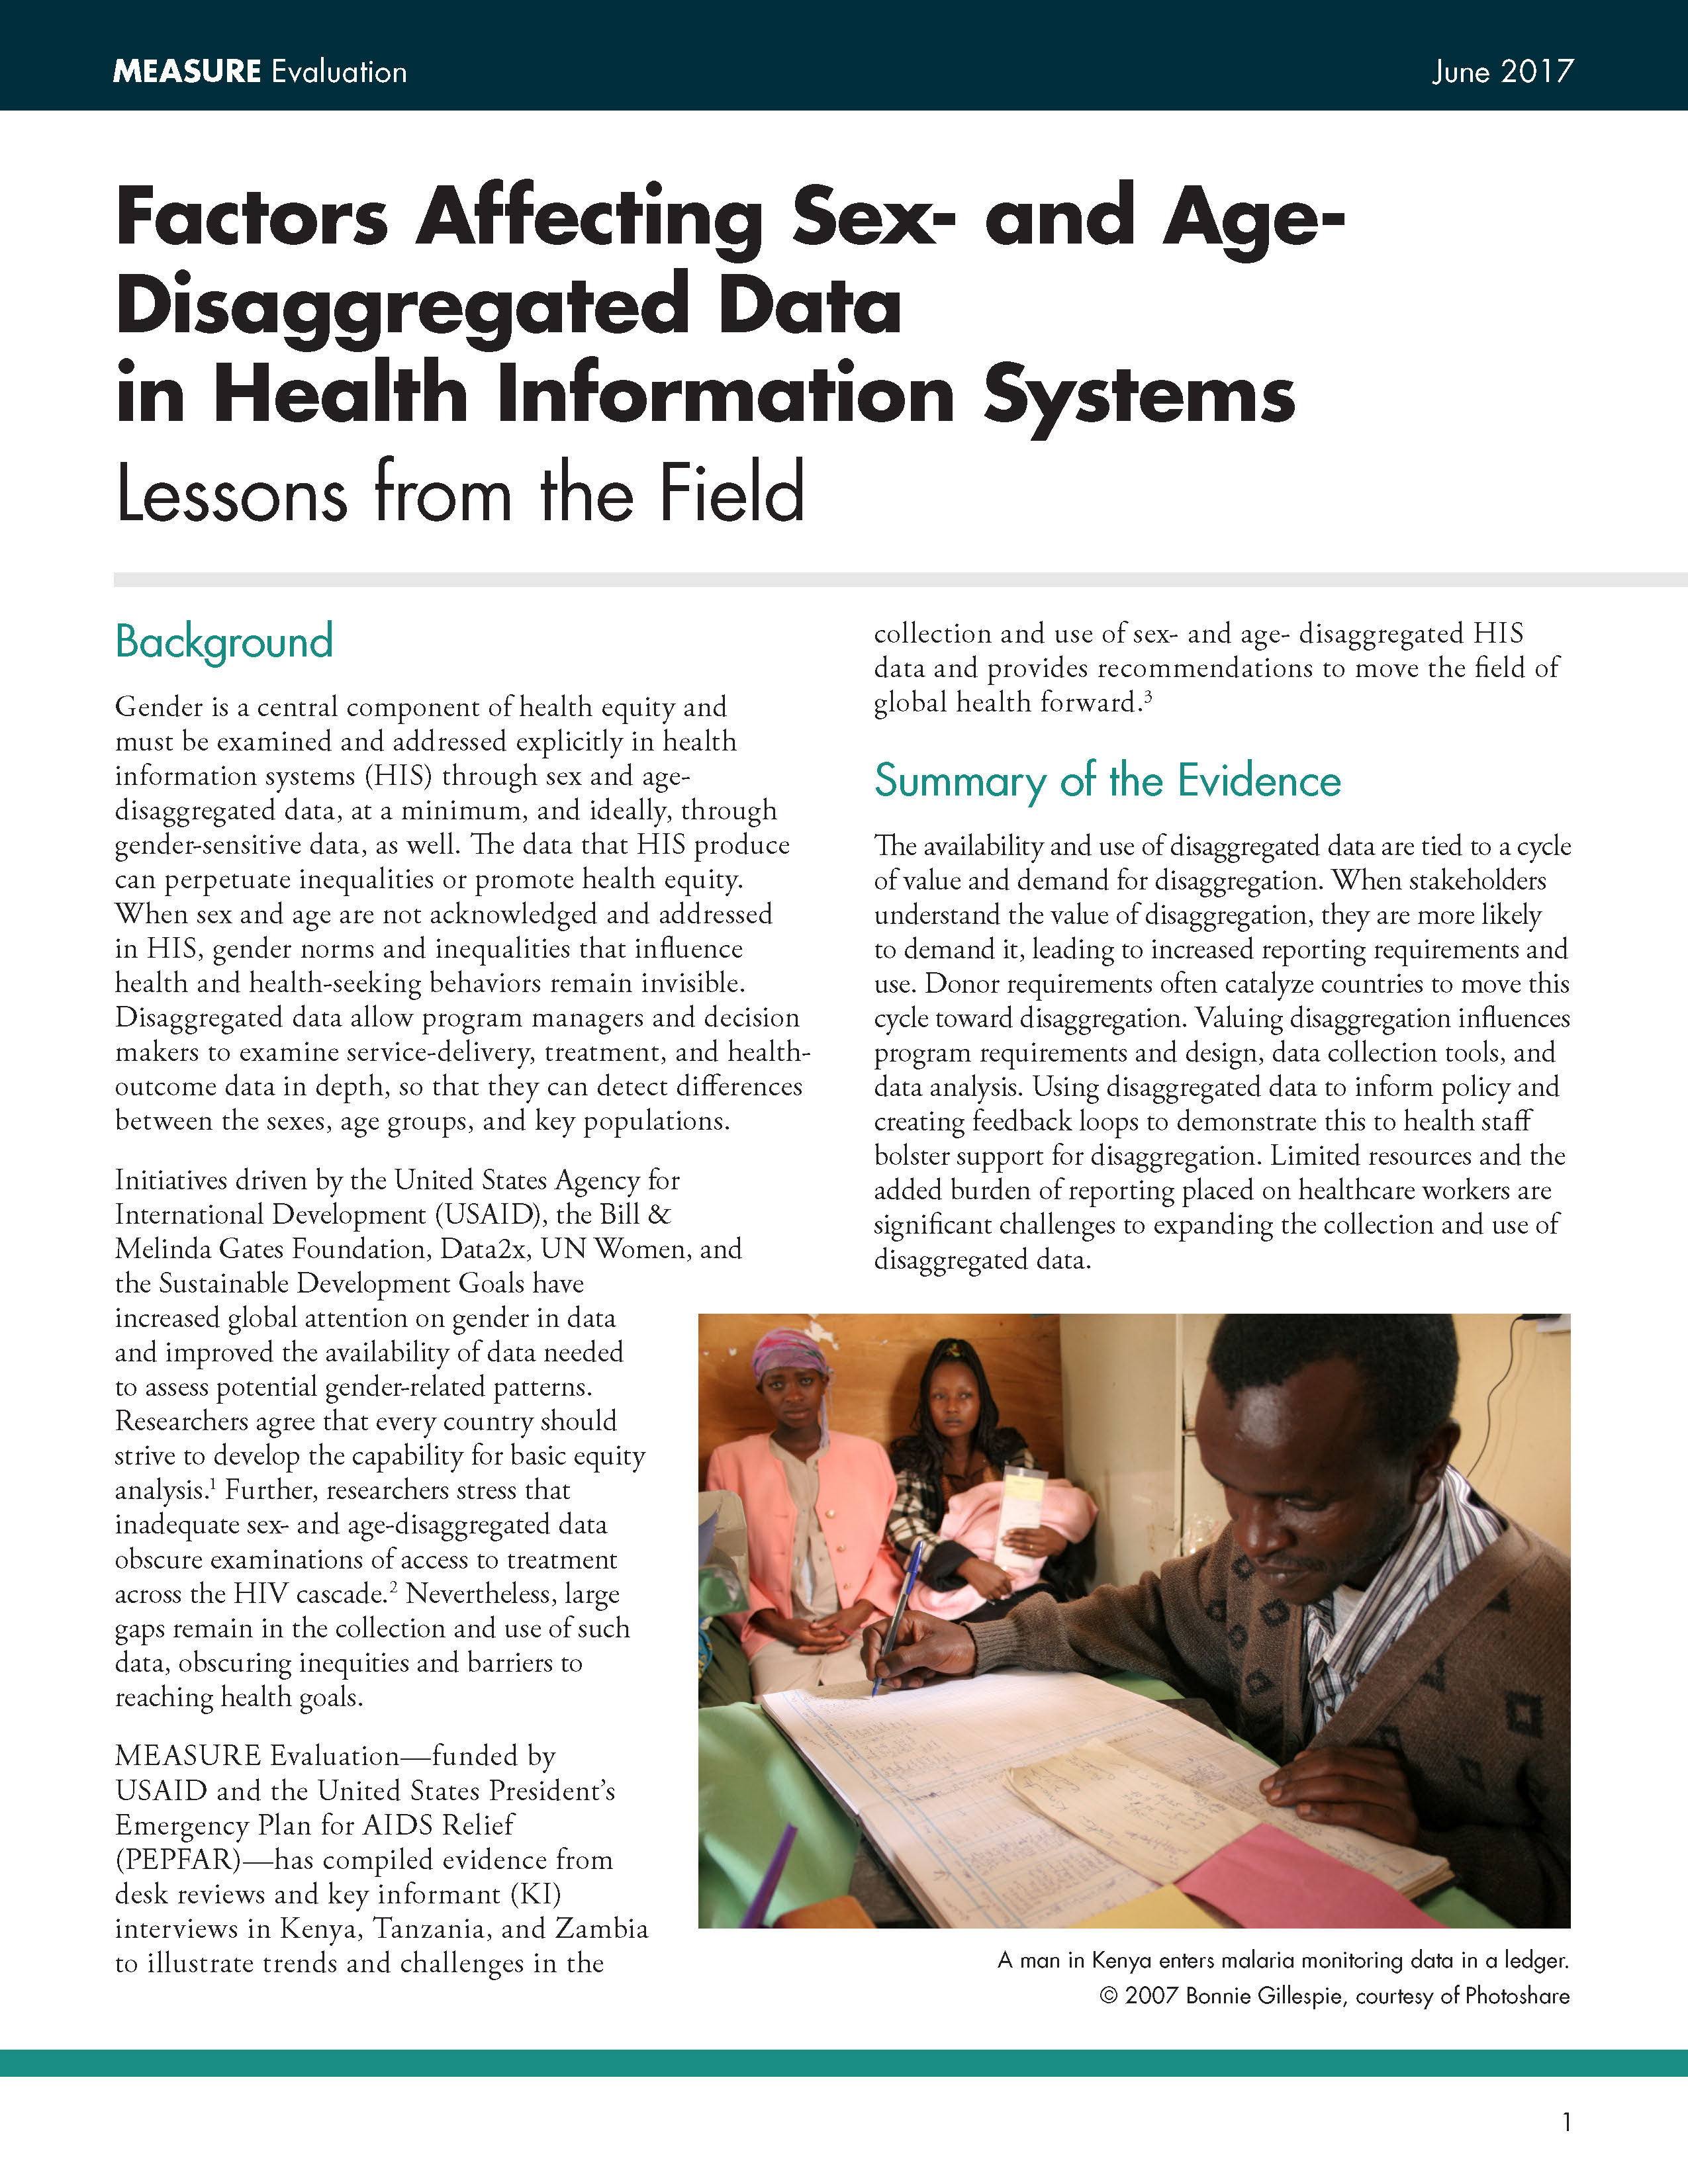 Factors Affecting Sex- and Age-Disaggregated Data in Health Information Systems  Lessons from the Field